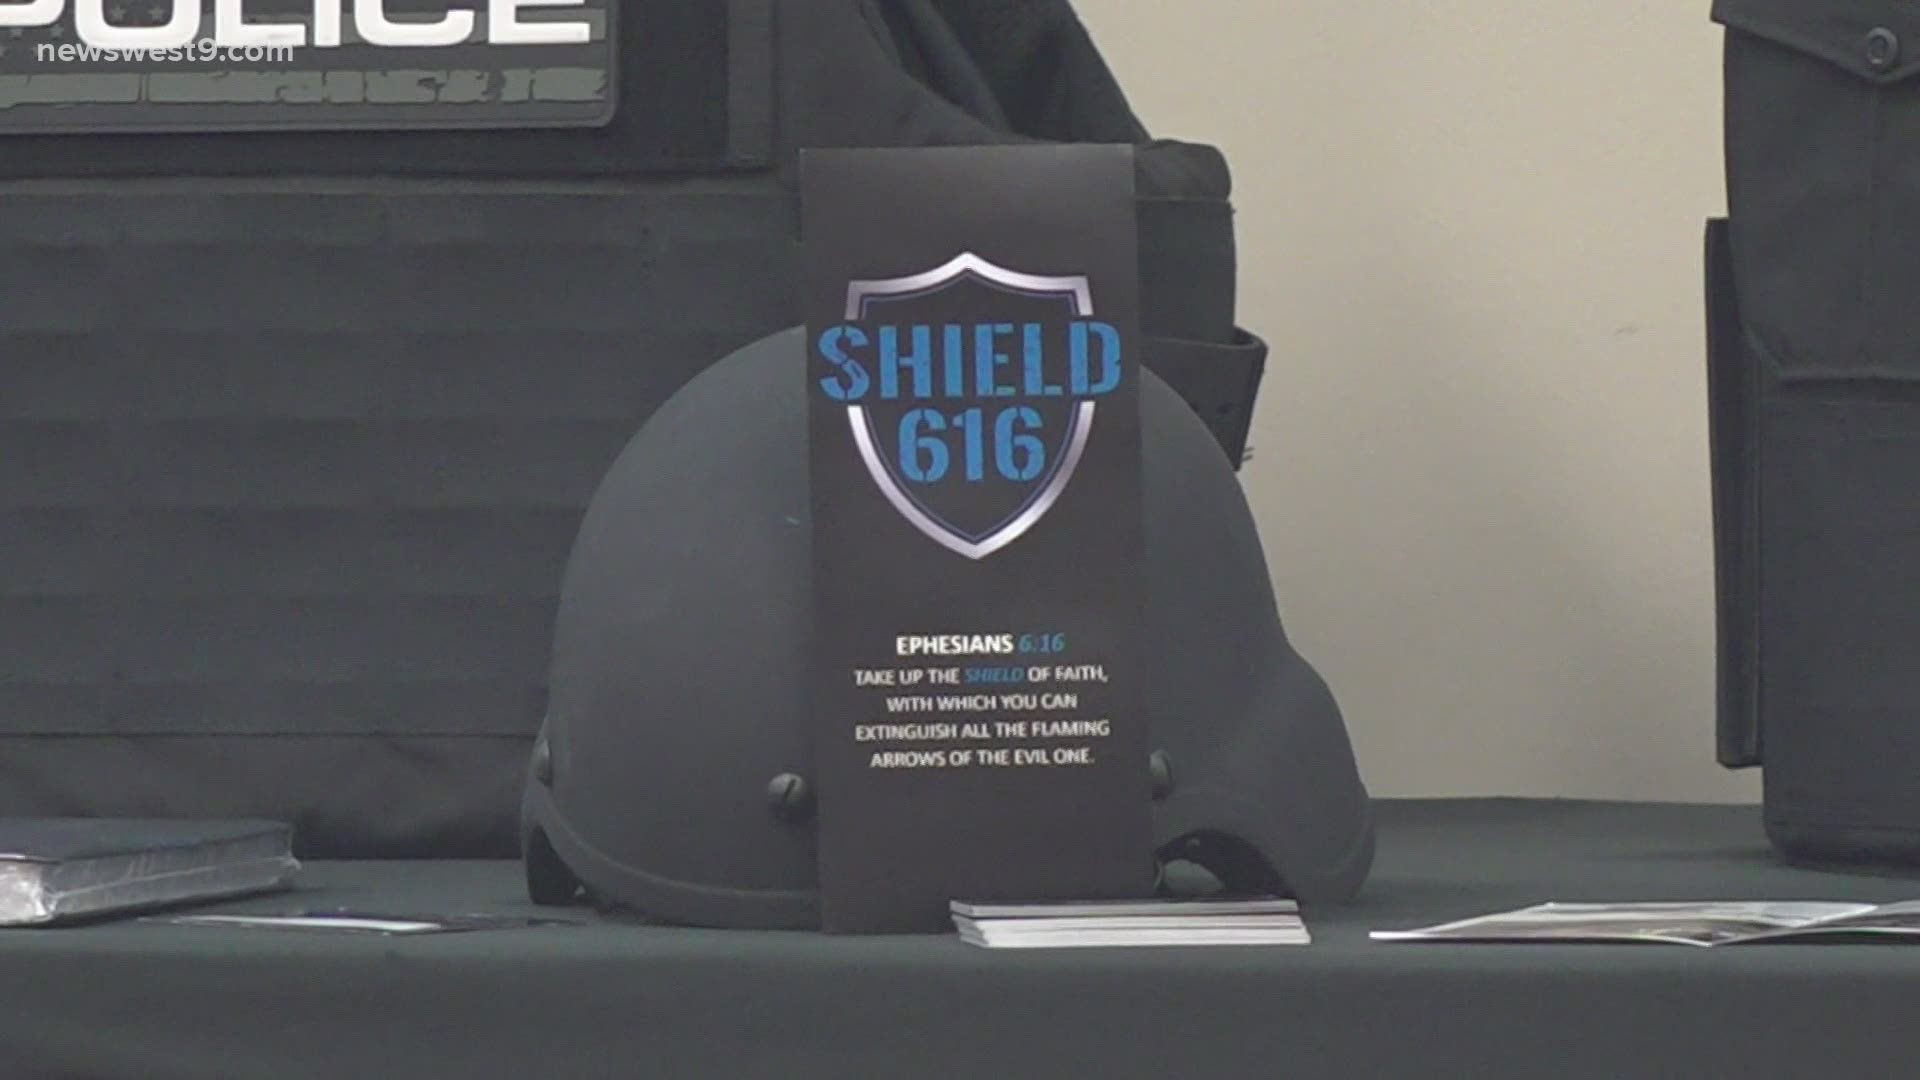 The event will offer people with ways to help provide better rifle armor to local officers and deputies.